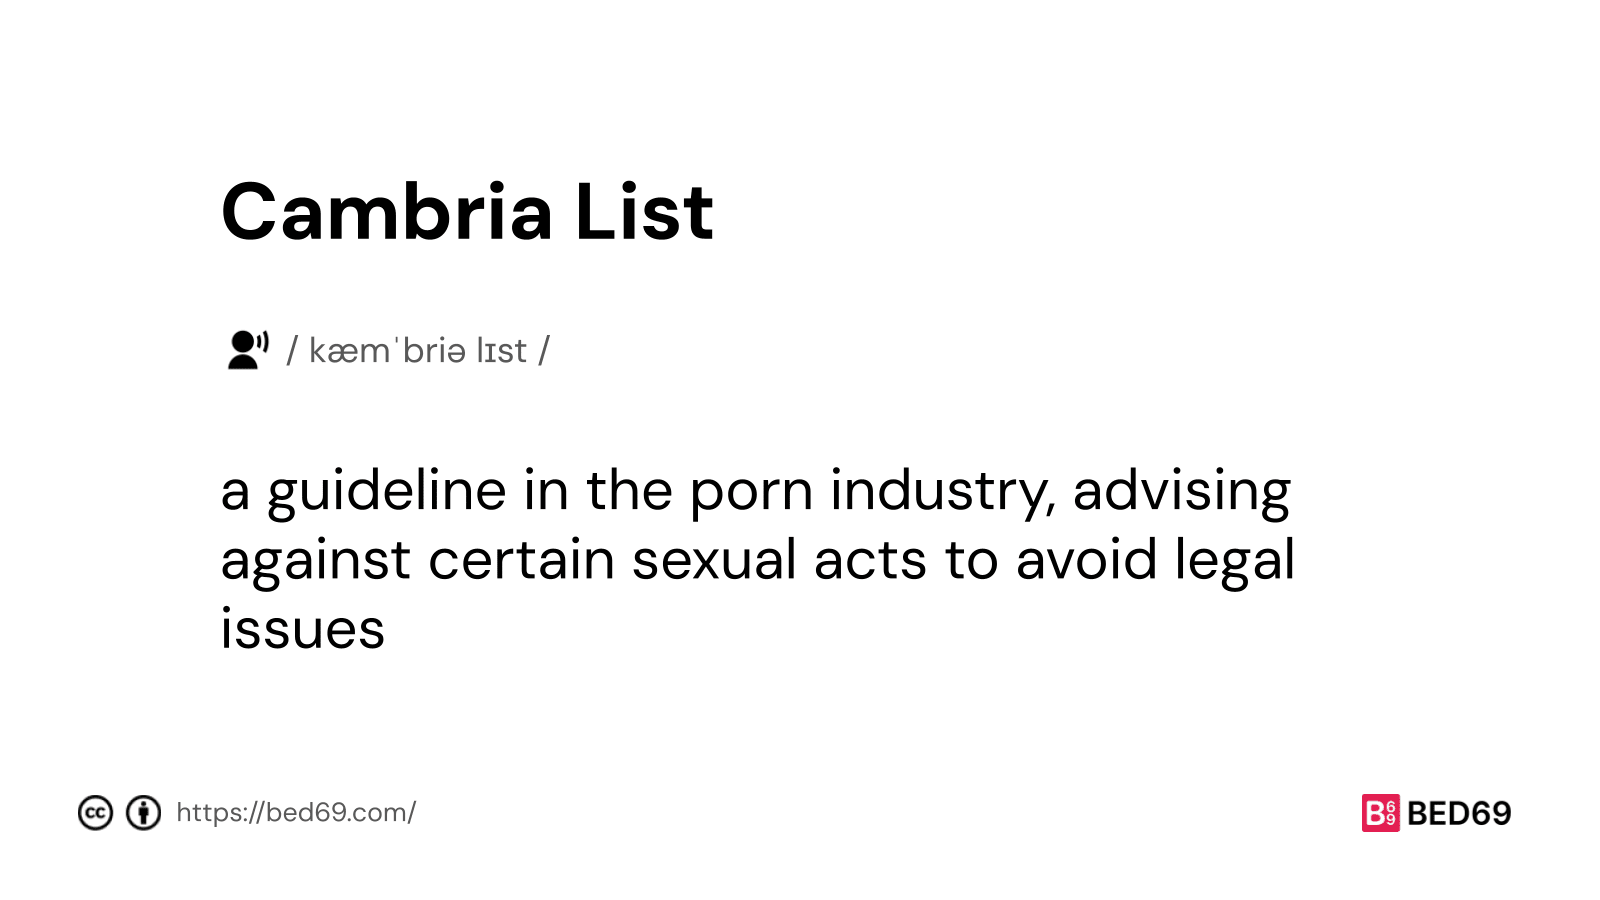 Cambria List - Word Definition